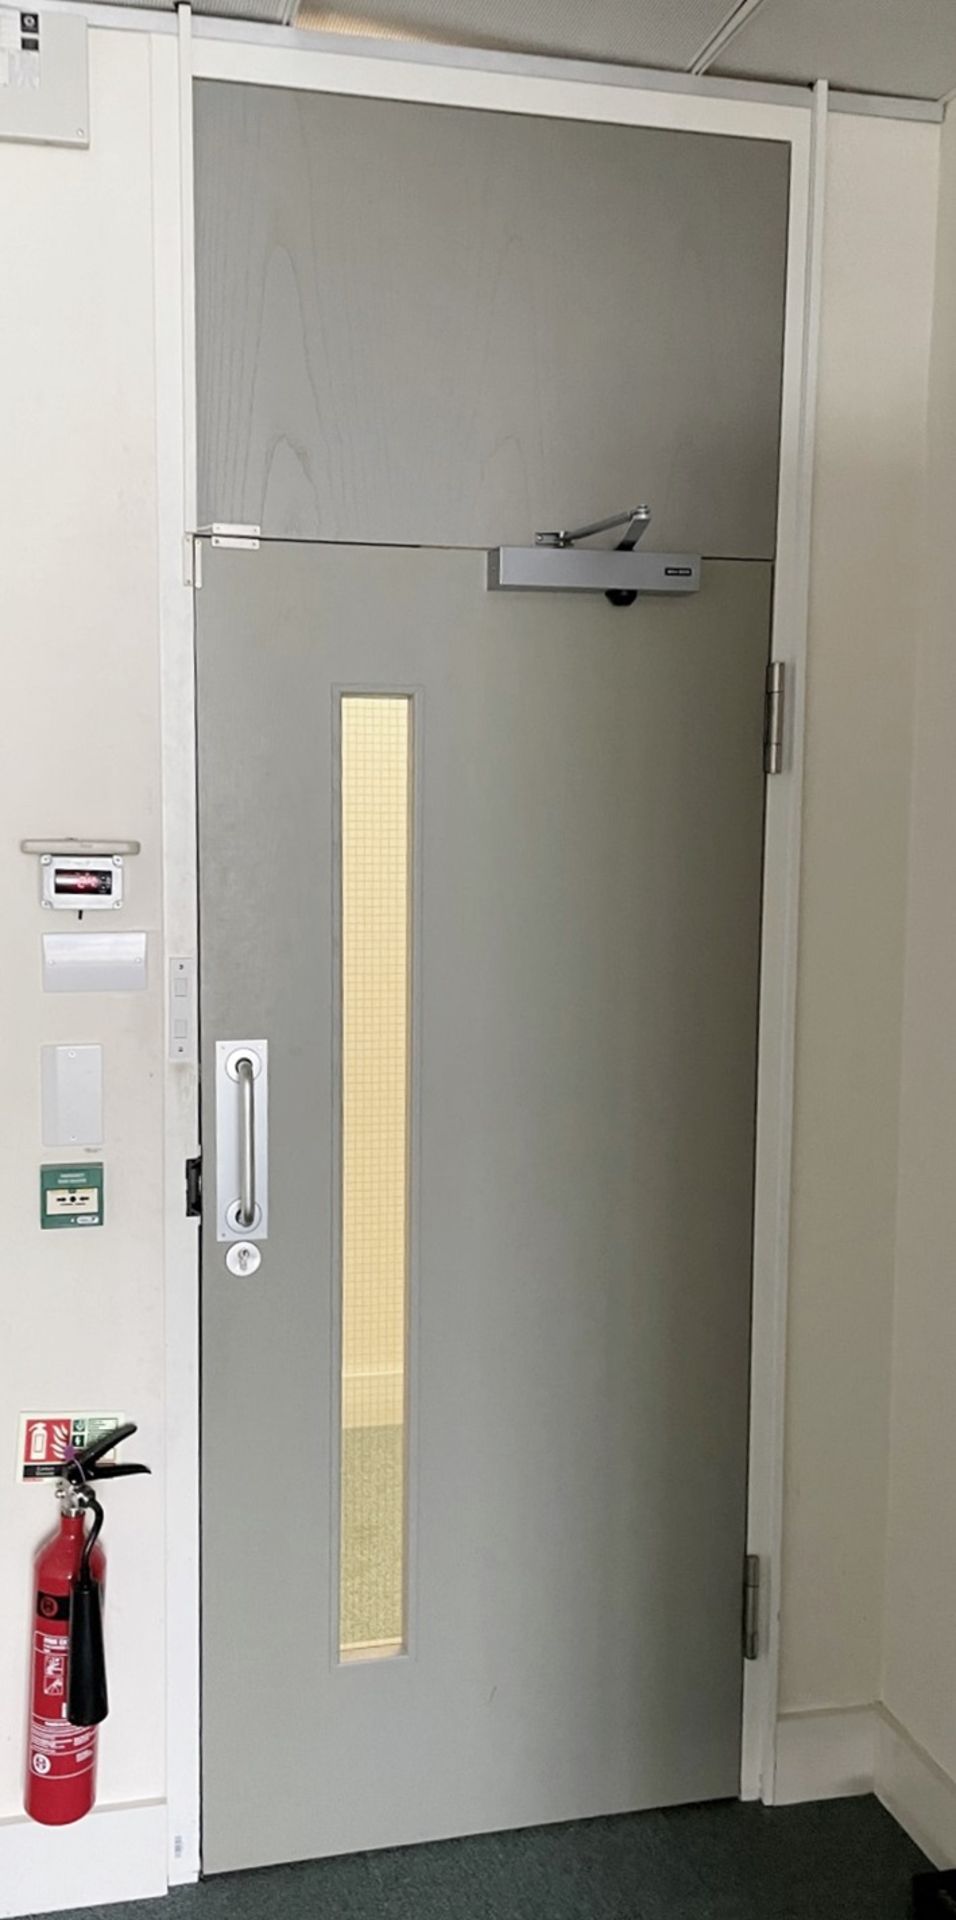 1 x Door With Top Panel And Closer - Dimensions: W100 x H265cm - Ref: ED183 - To Be Removed From